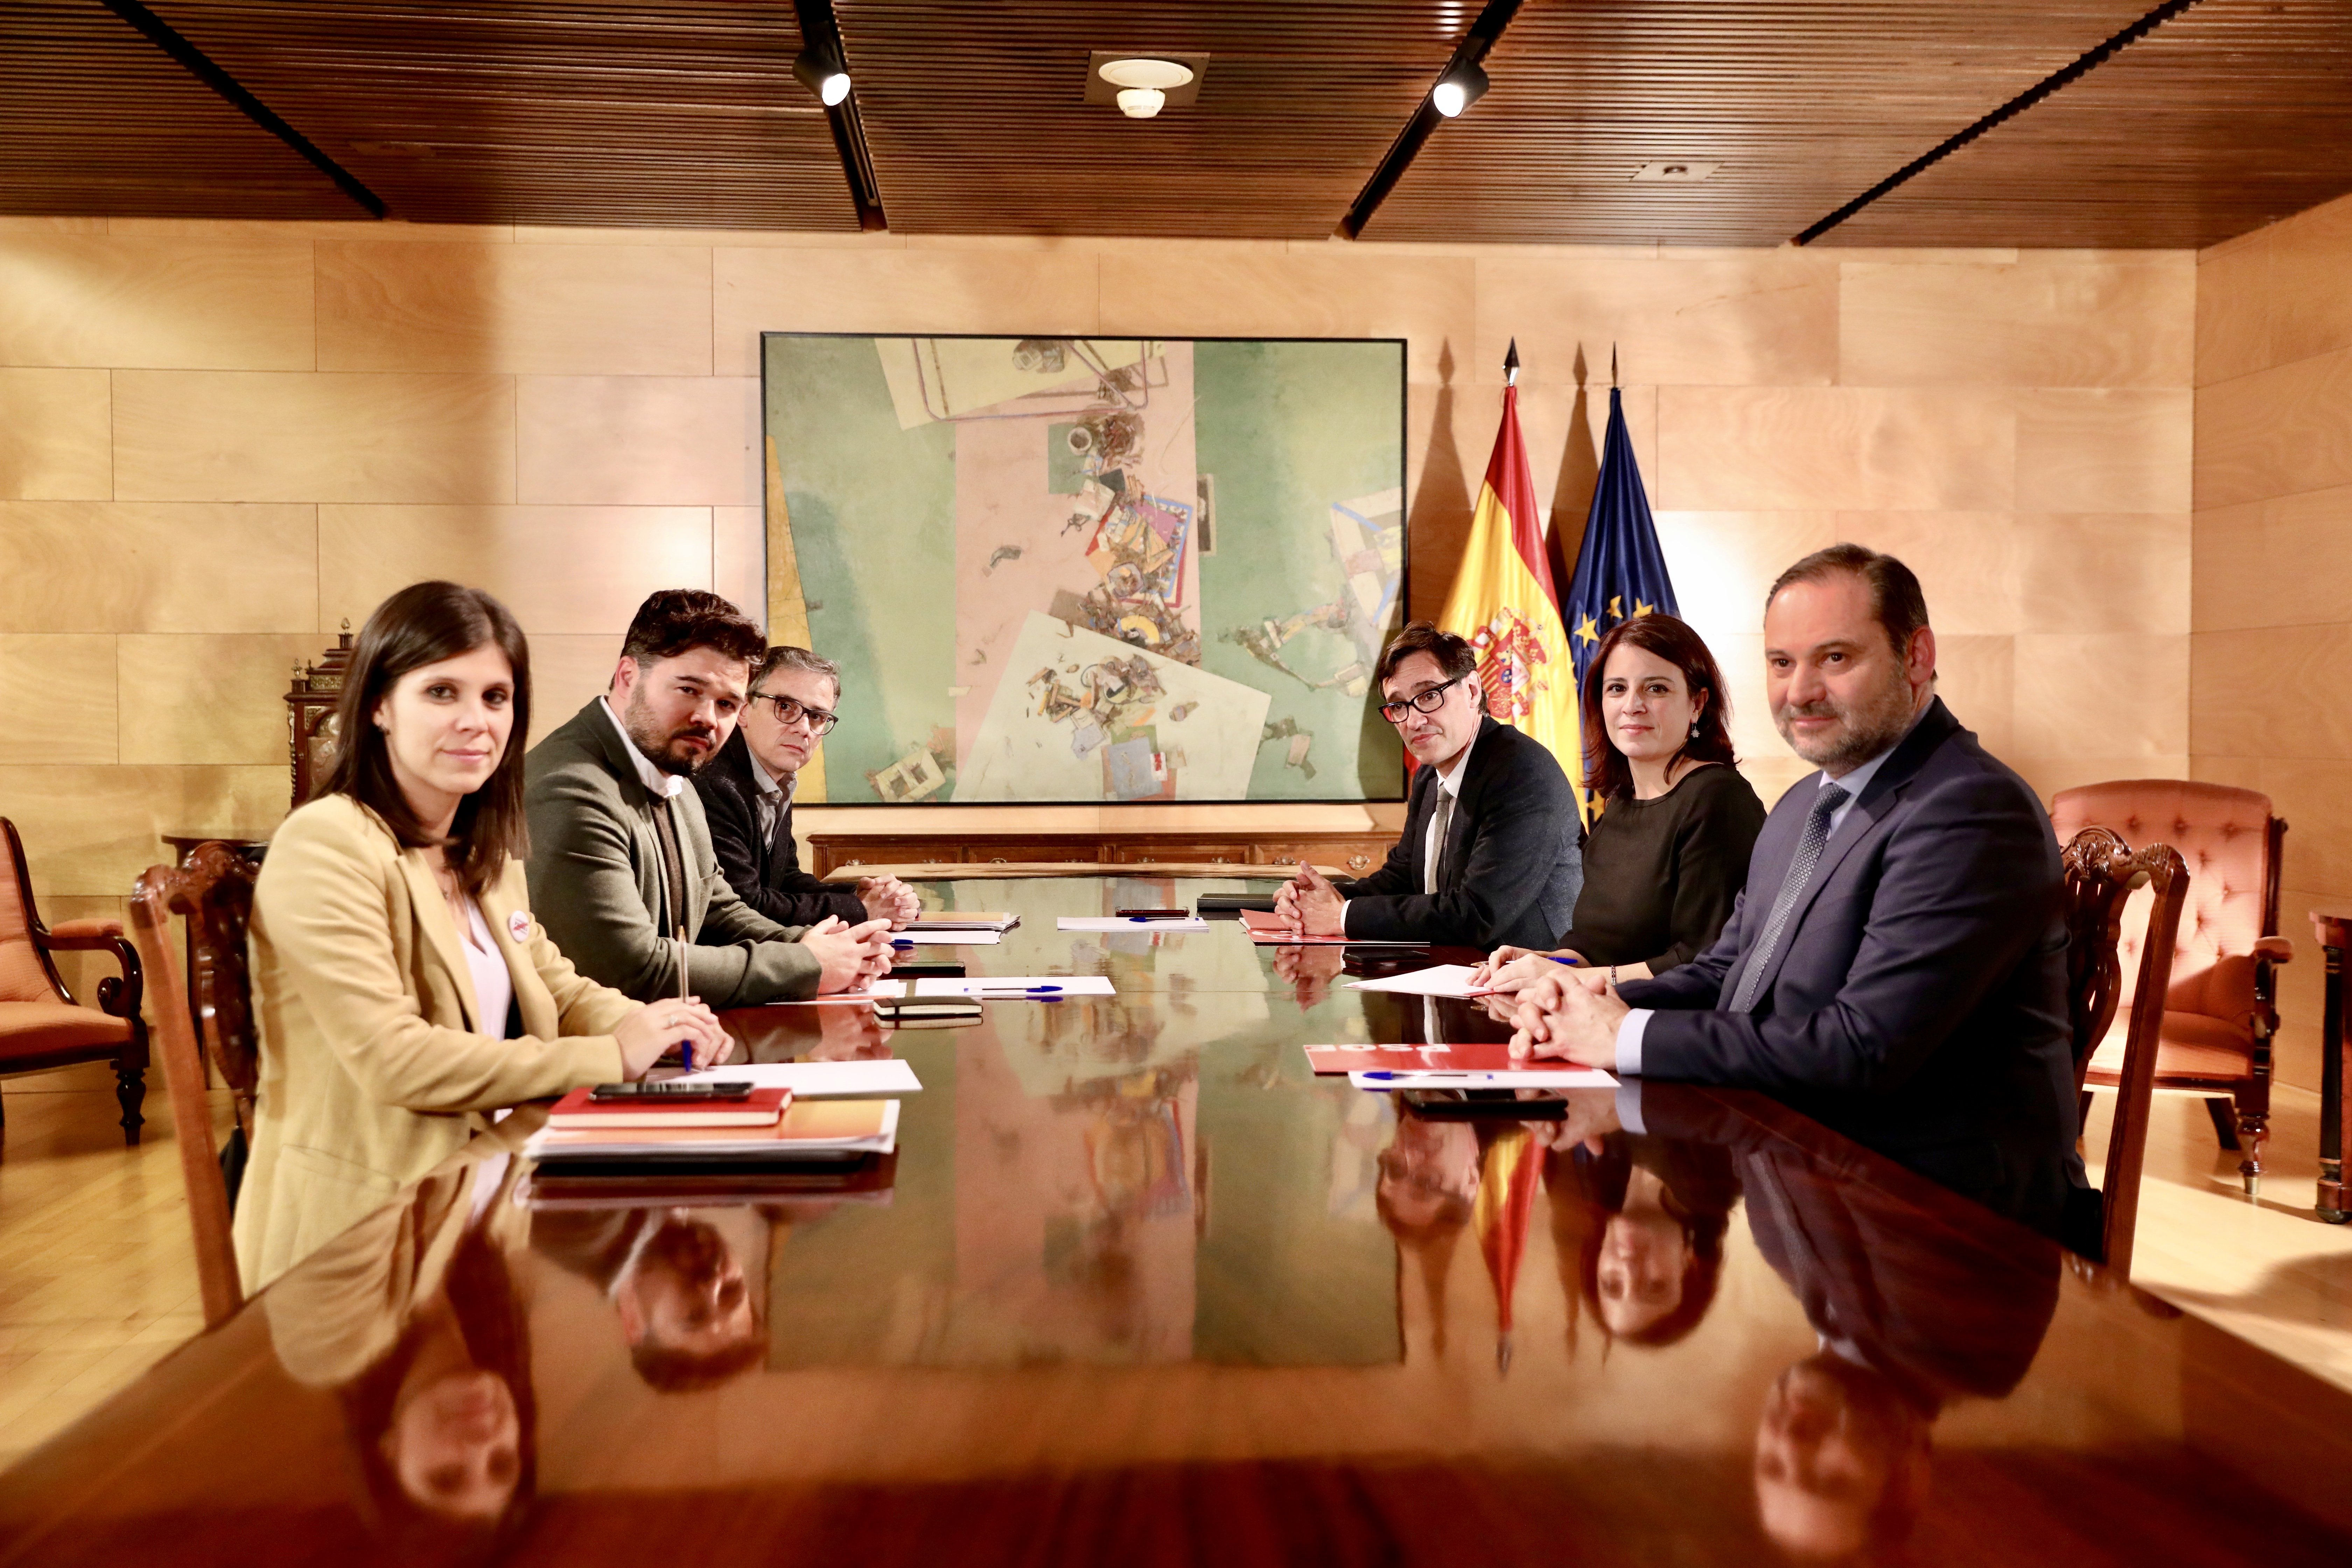 Second PSOE-ERC meeting: joint statement and progress on the "political path"